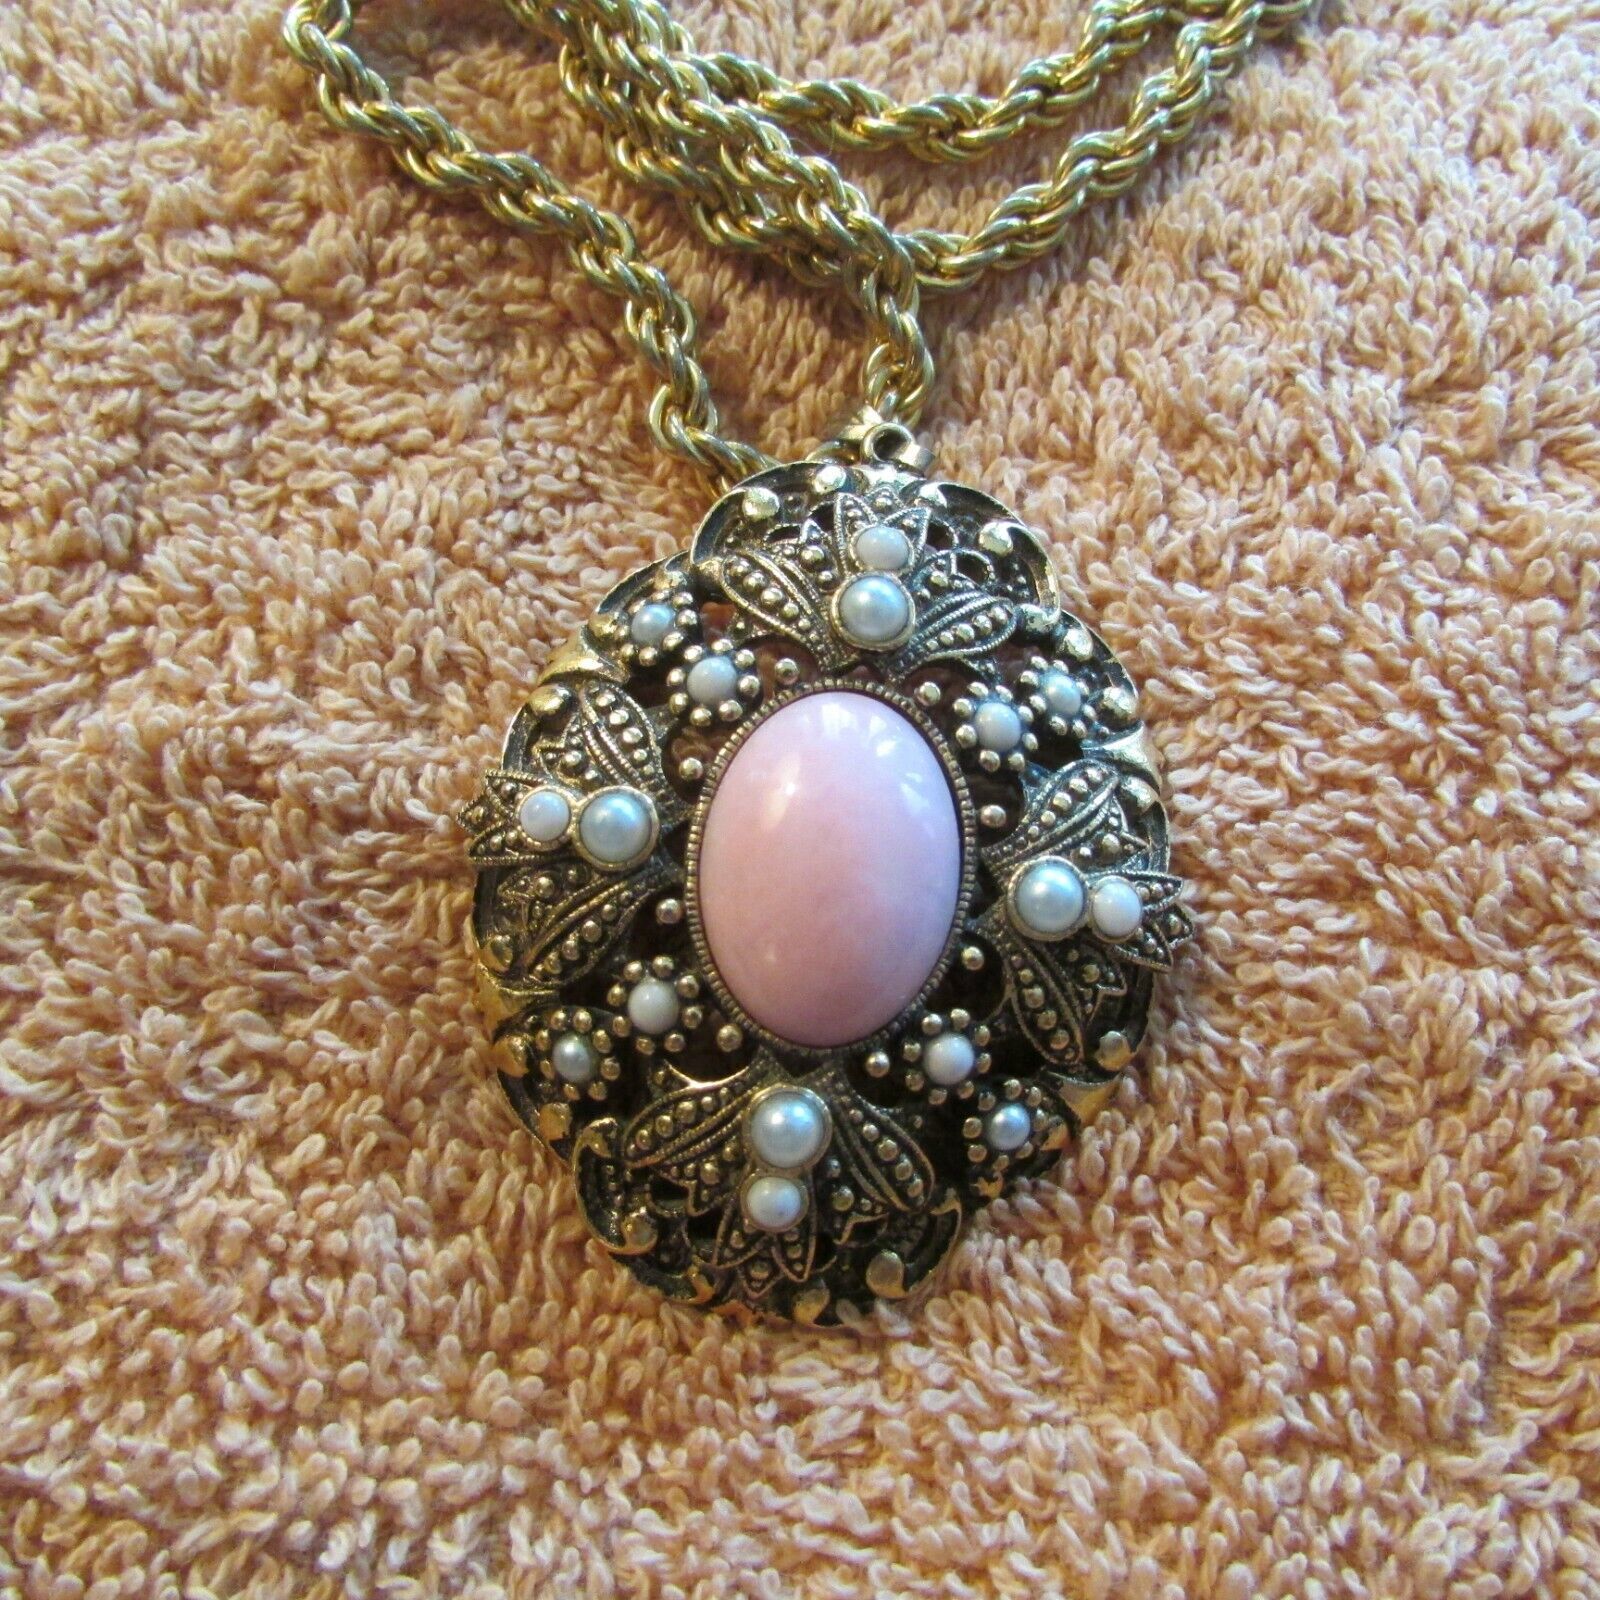 necklace AVON 24" ROPE-LIKE CHAIN + 2" PENDANT w/pink stone & sm pearls (jewel5) - $34.65